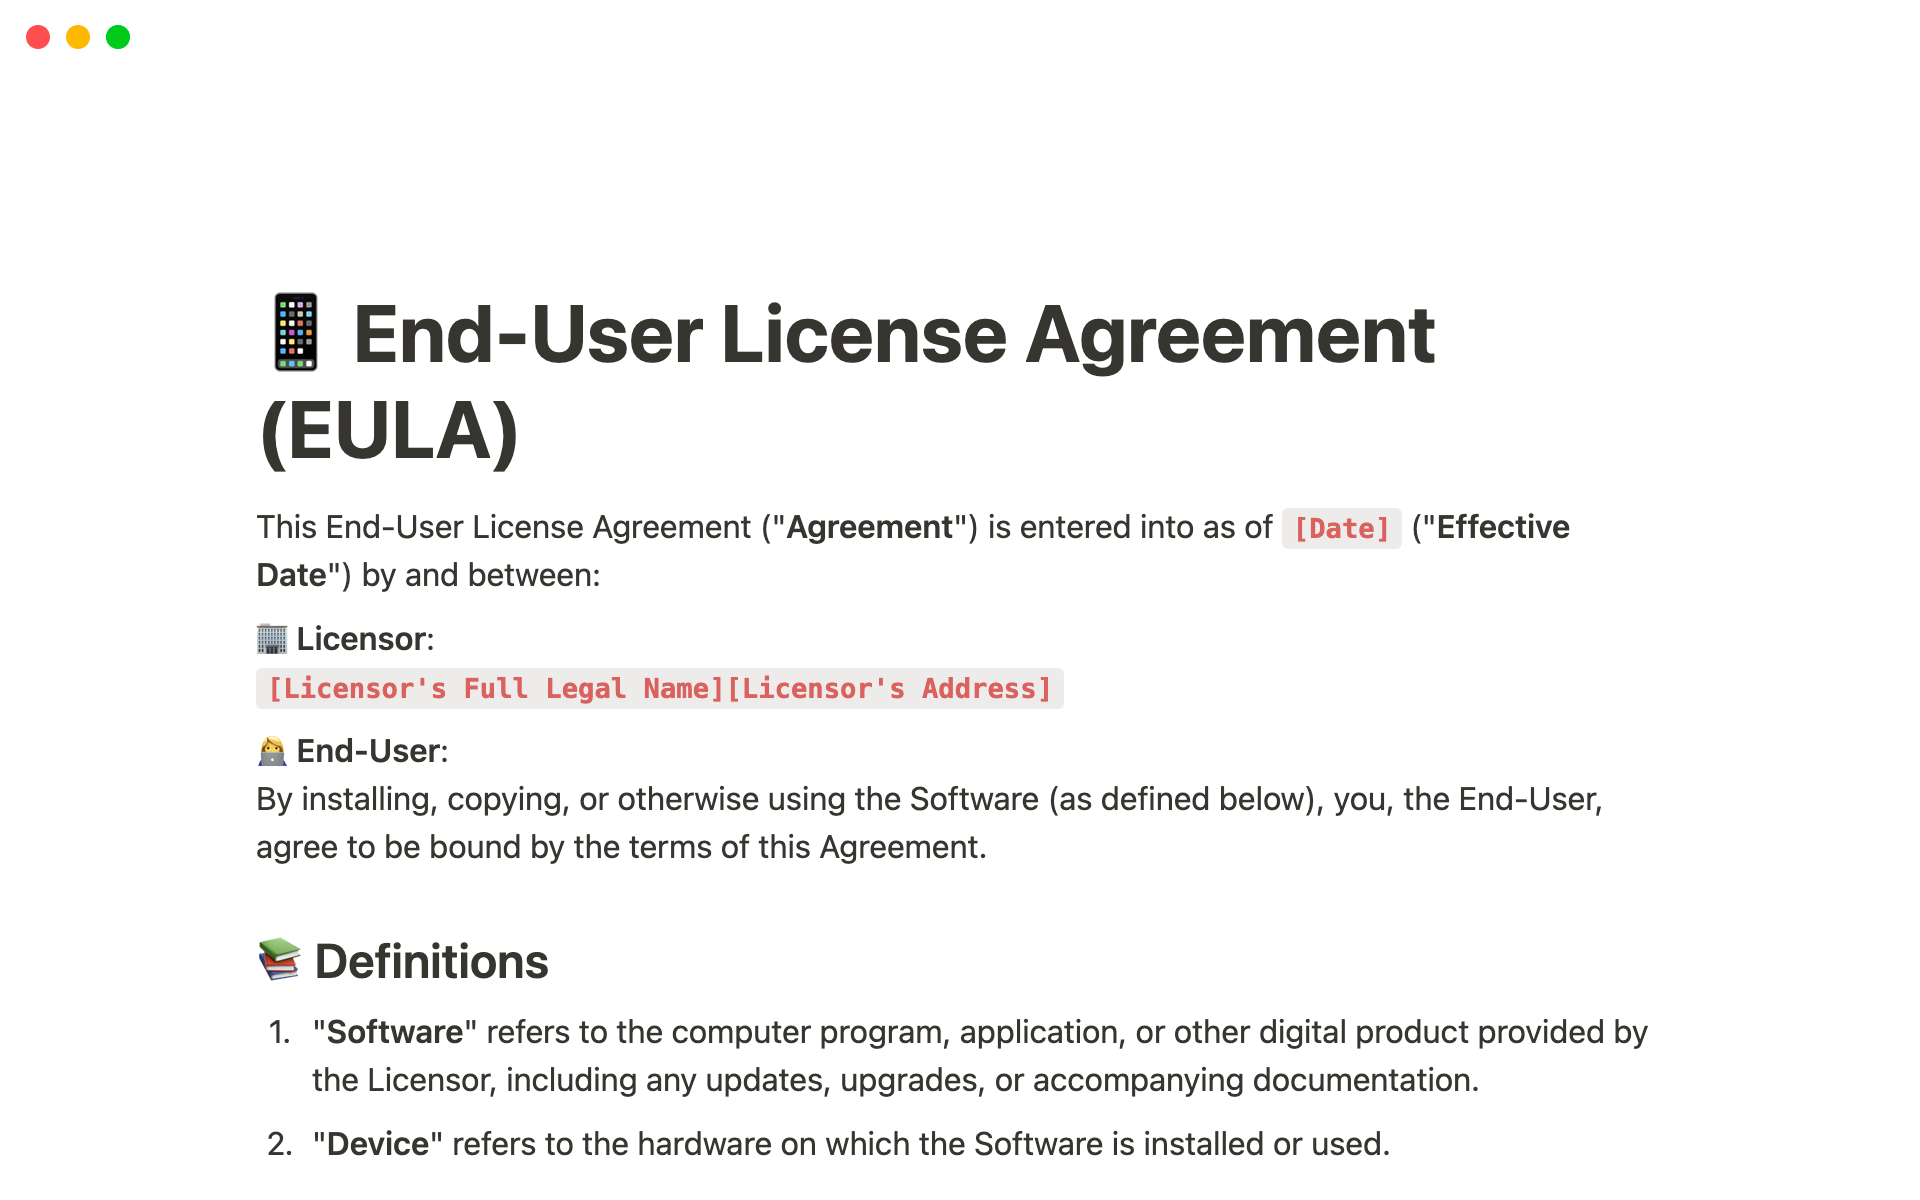 This End-User License Agreement (EULA) template provides a comprehensive outline of terms for software or app developers.